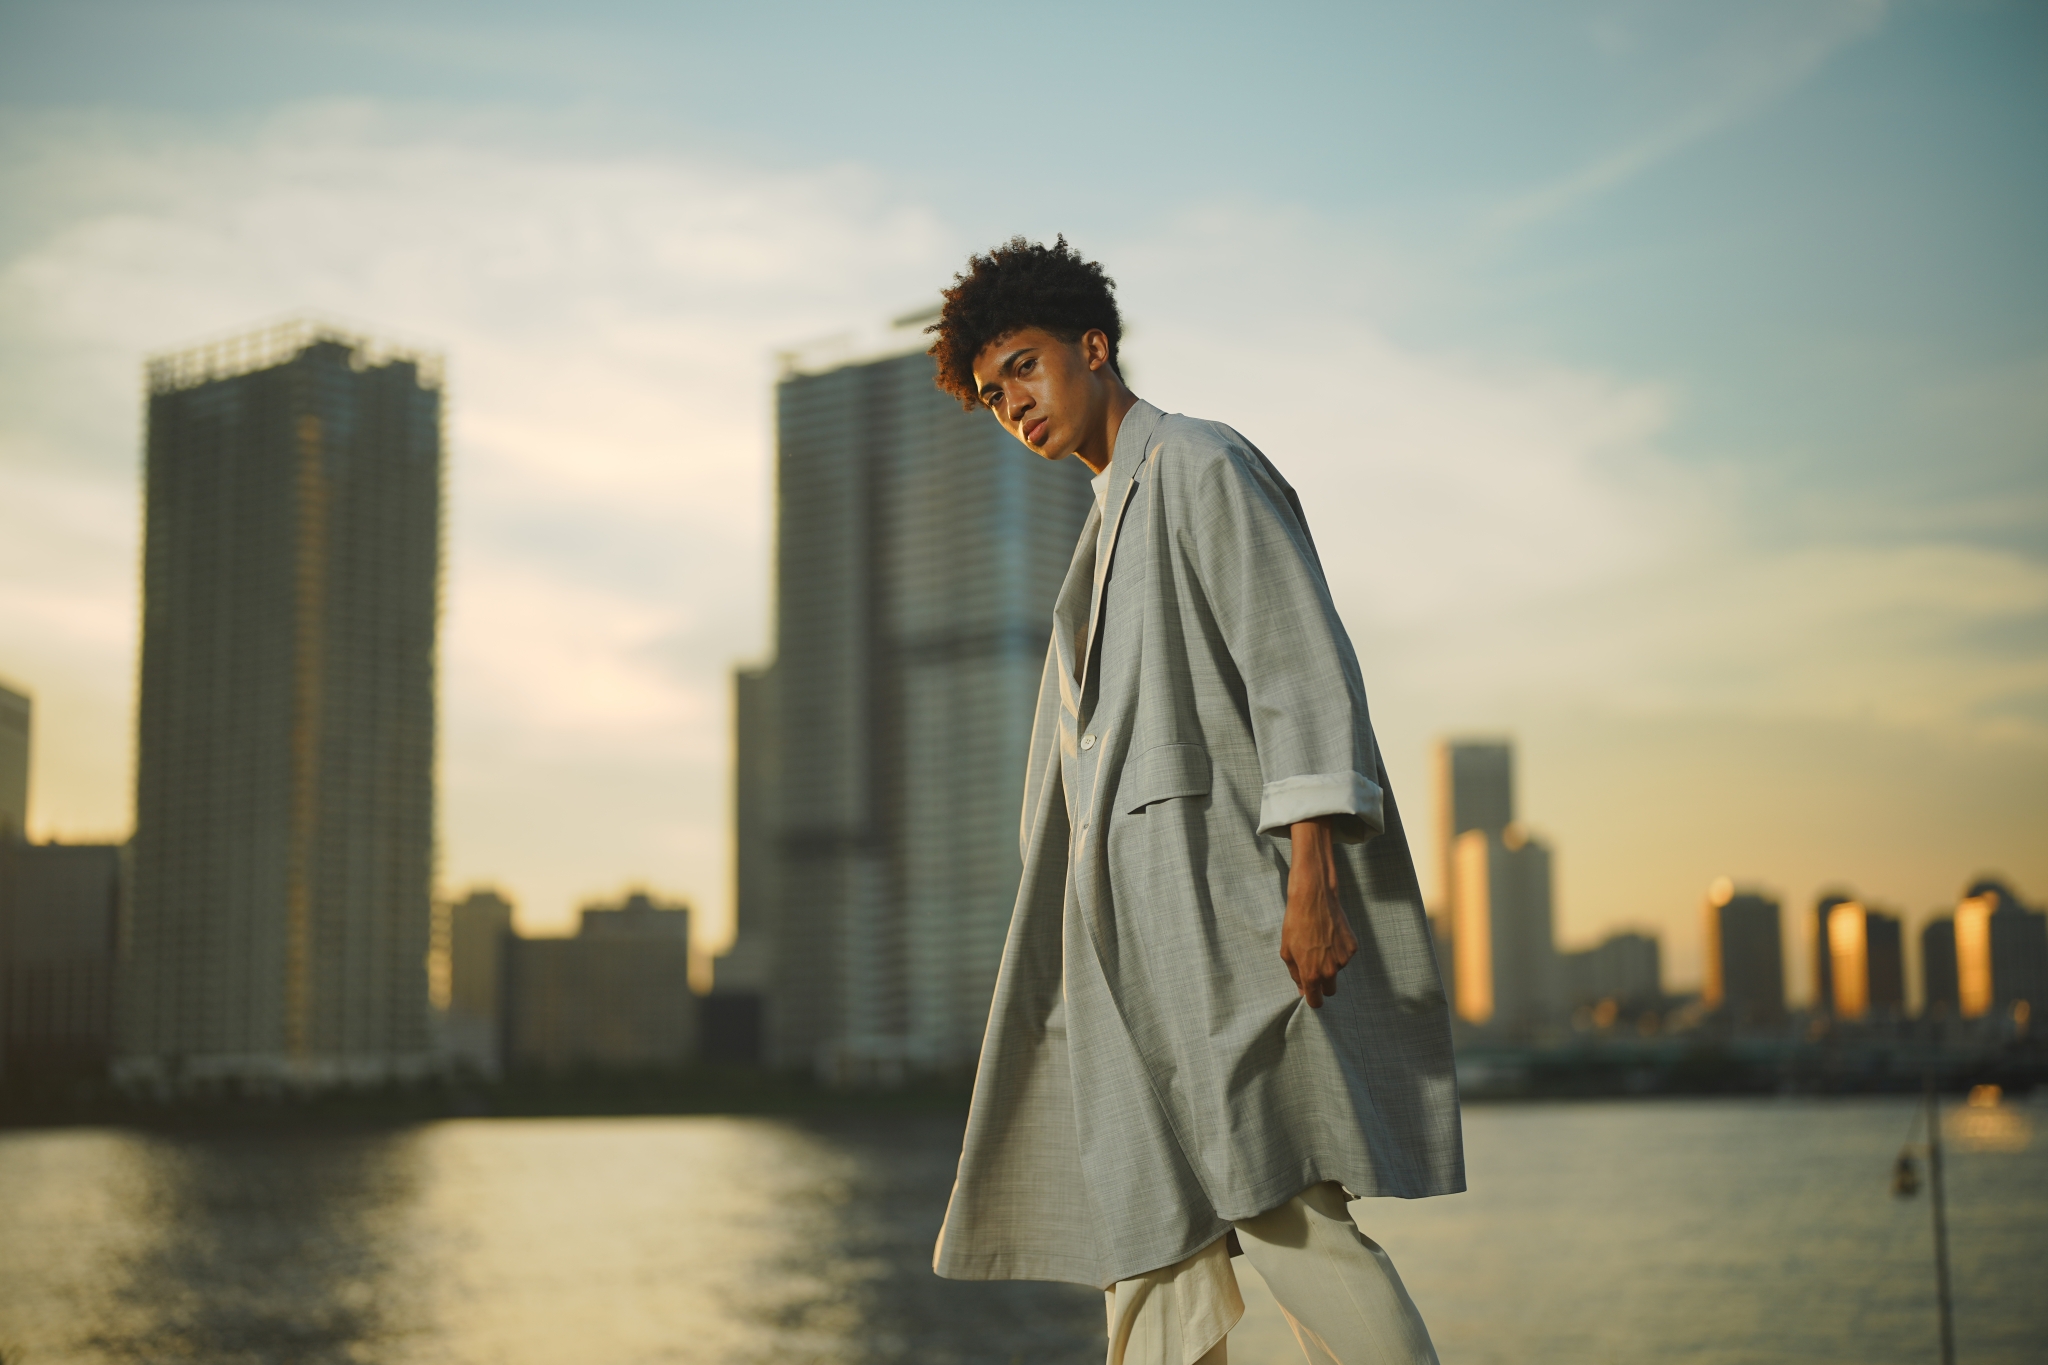 Male model with cityscape by water in the background